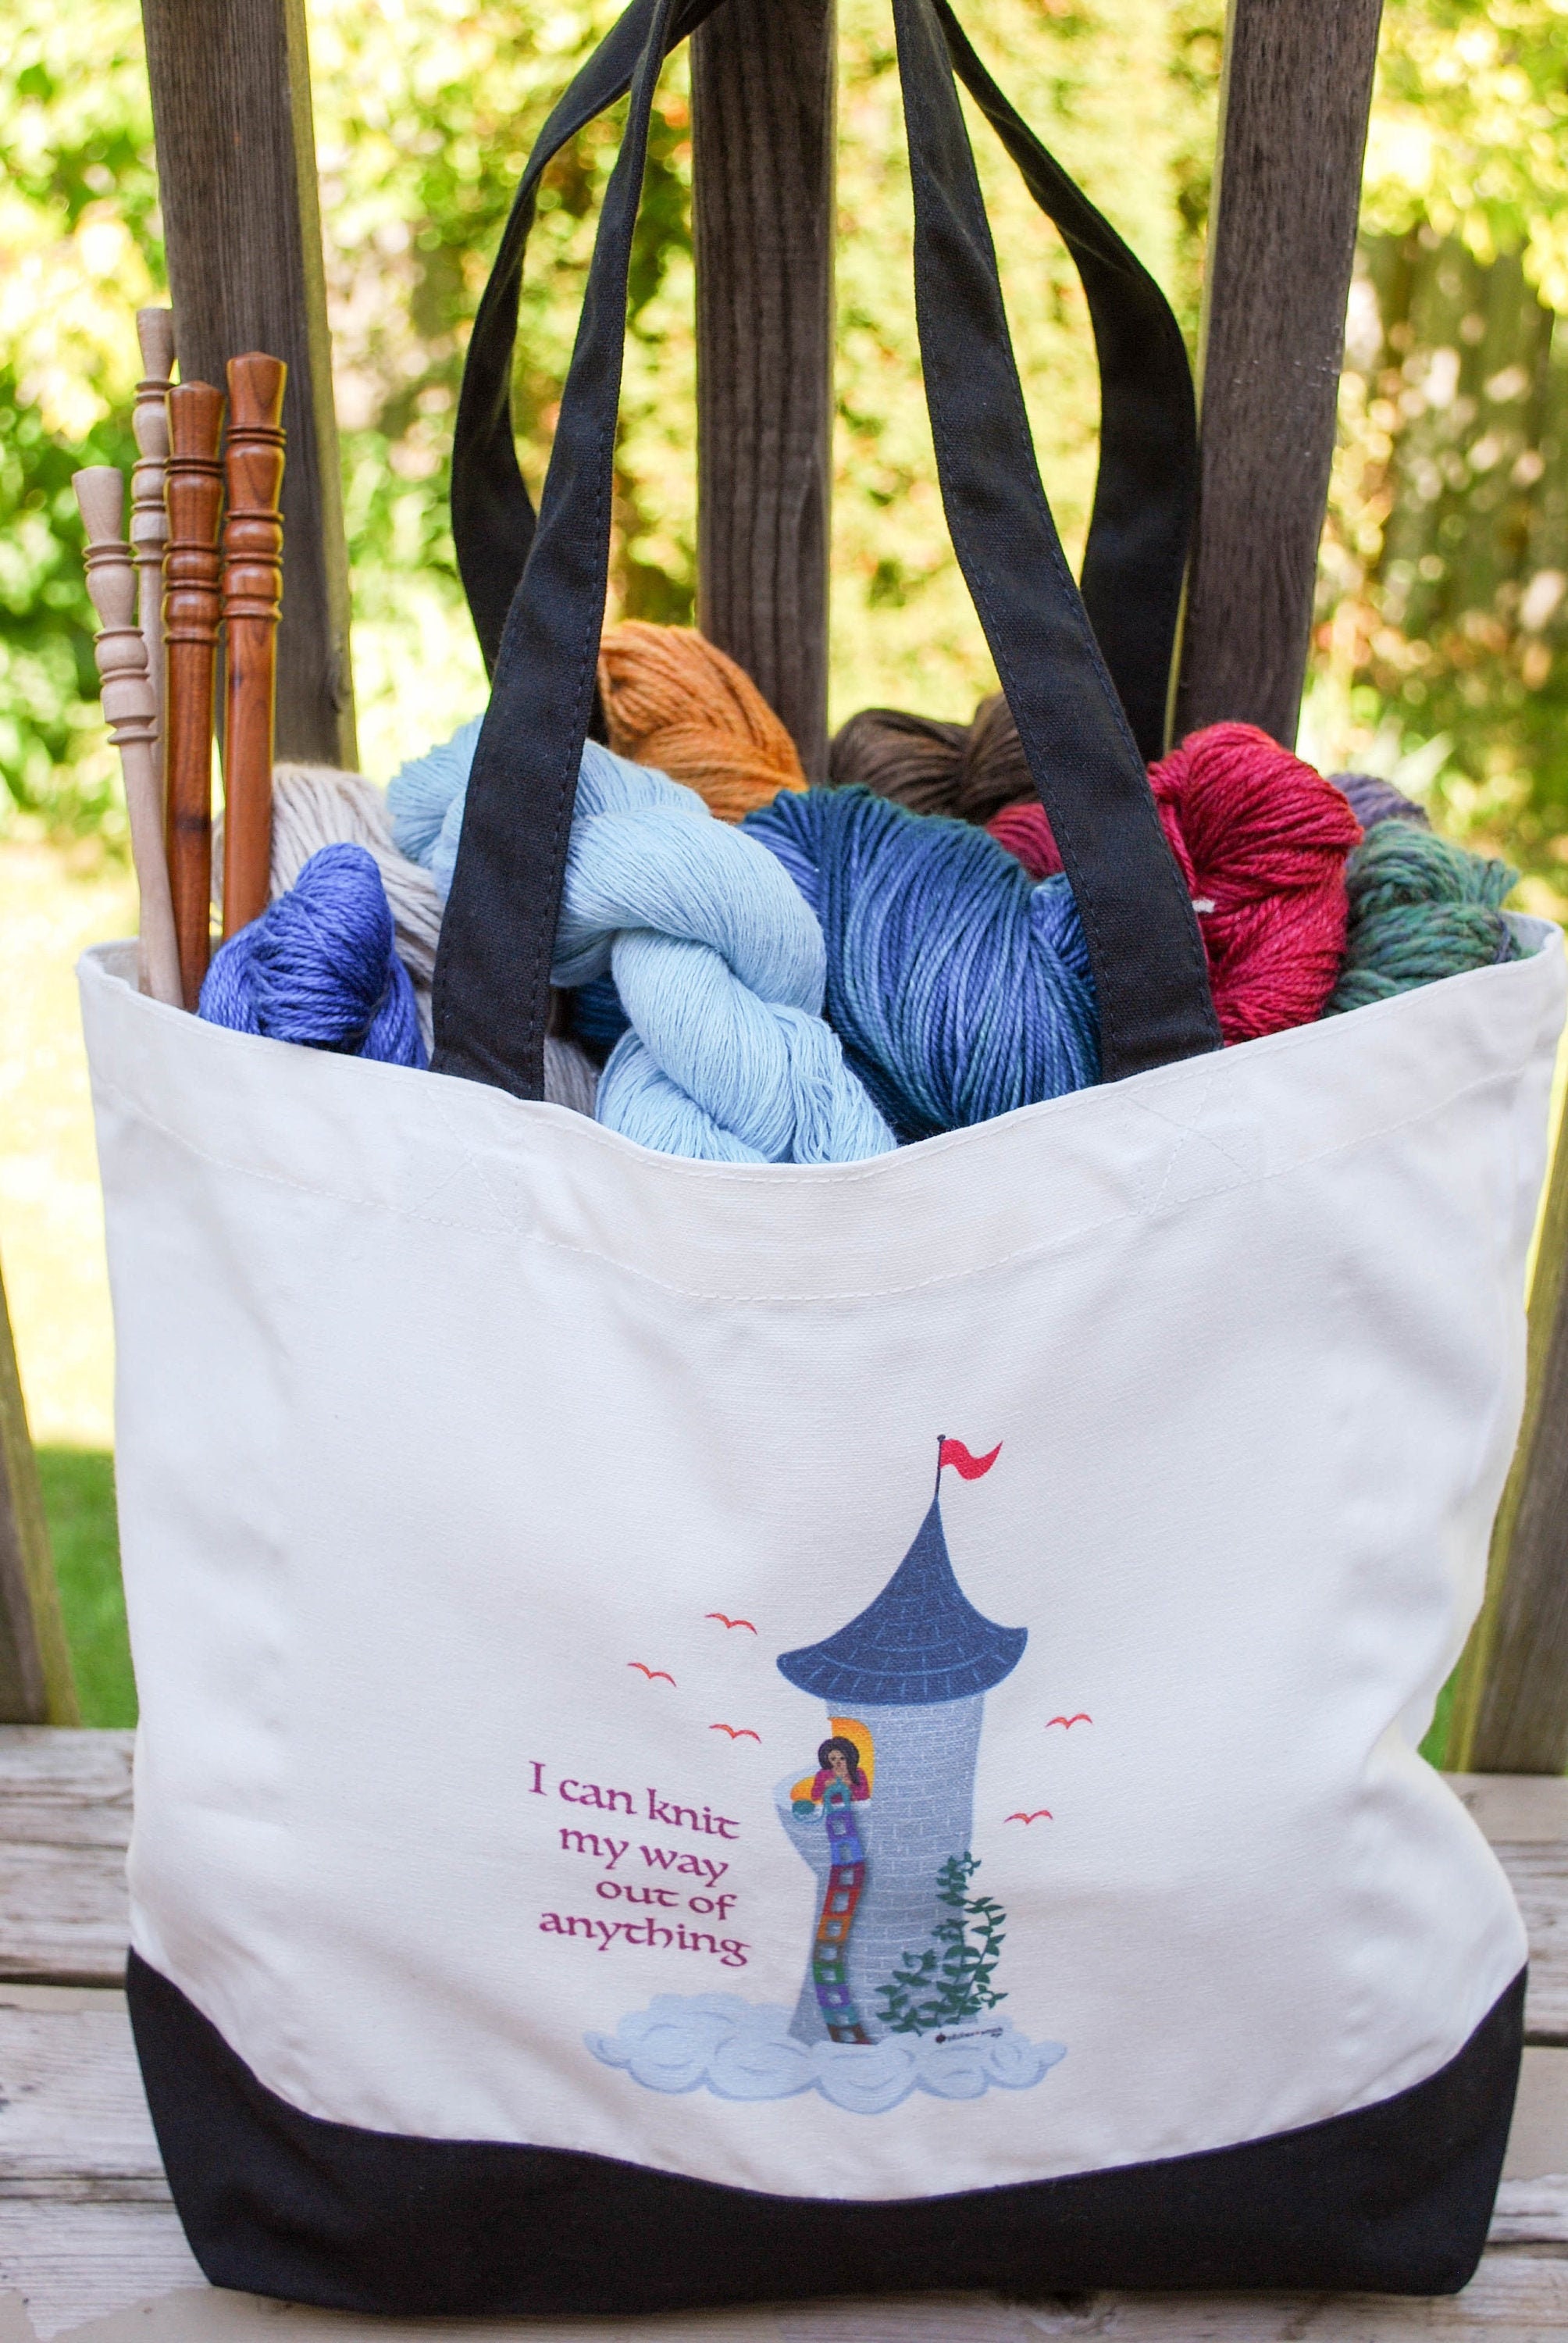 Knitting Tote Bag / Not Yarn / Gifts for Knitters / Crochet / 